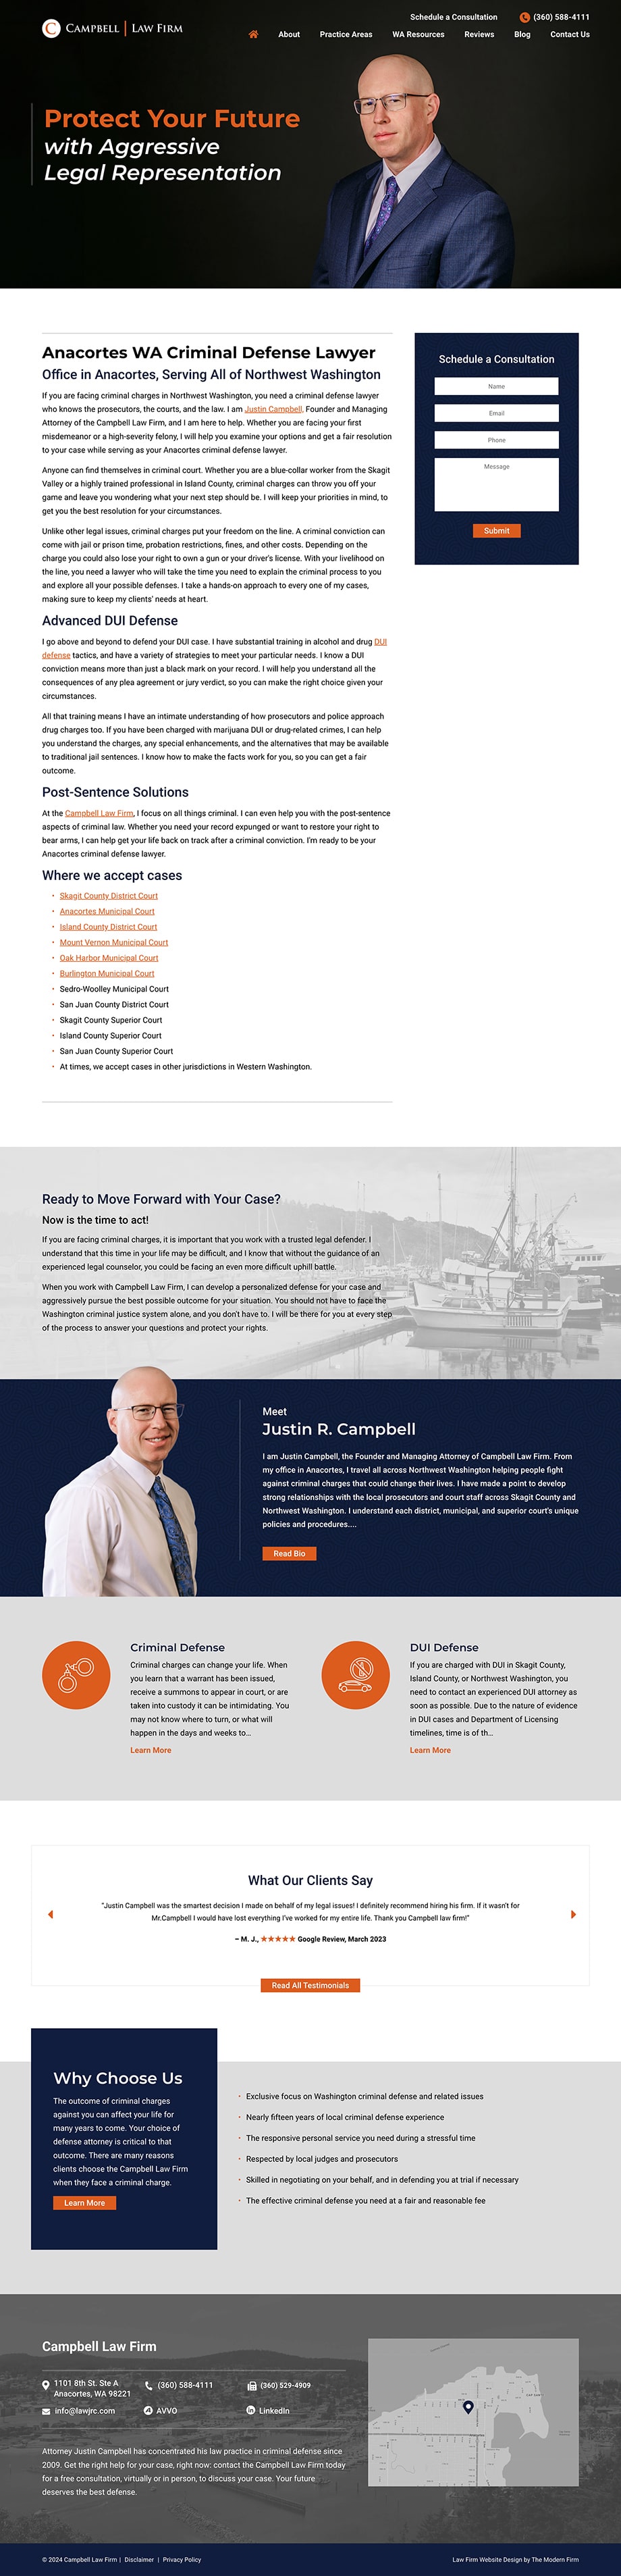 Law Firm Website Design for Campbell Law Firm